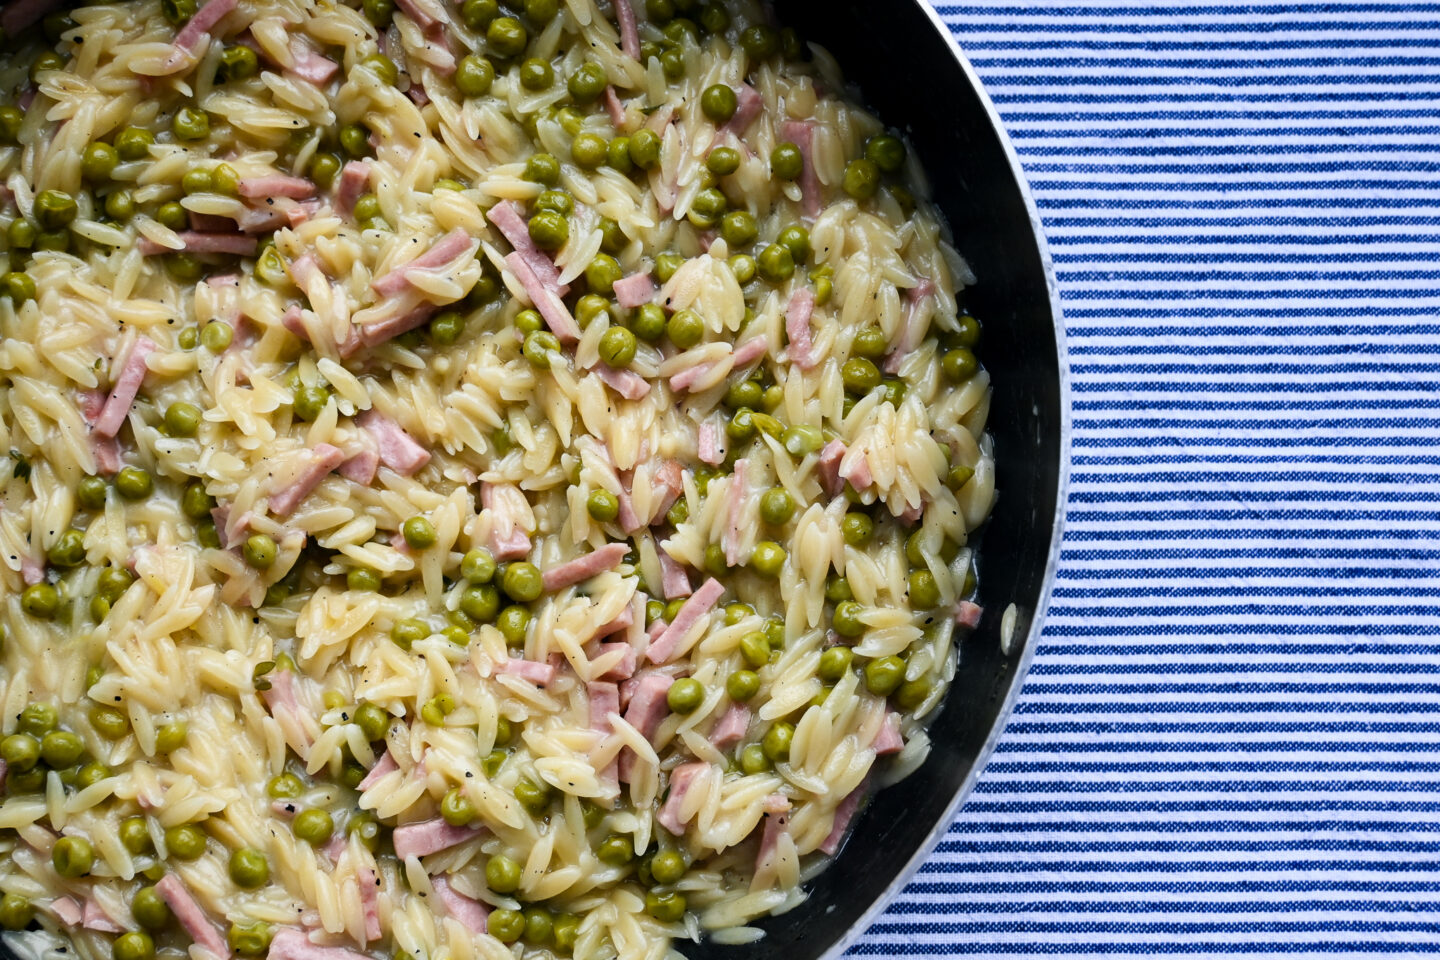 Skillet with orzo, ham cubes & peas on a blue and white striped background